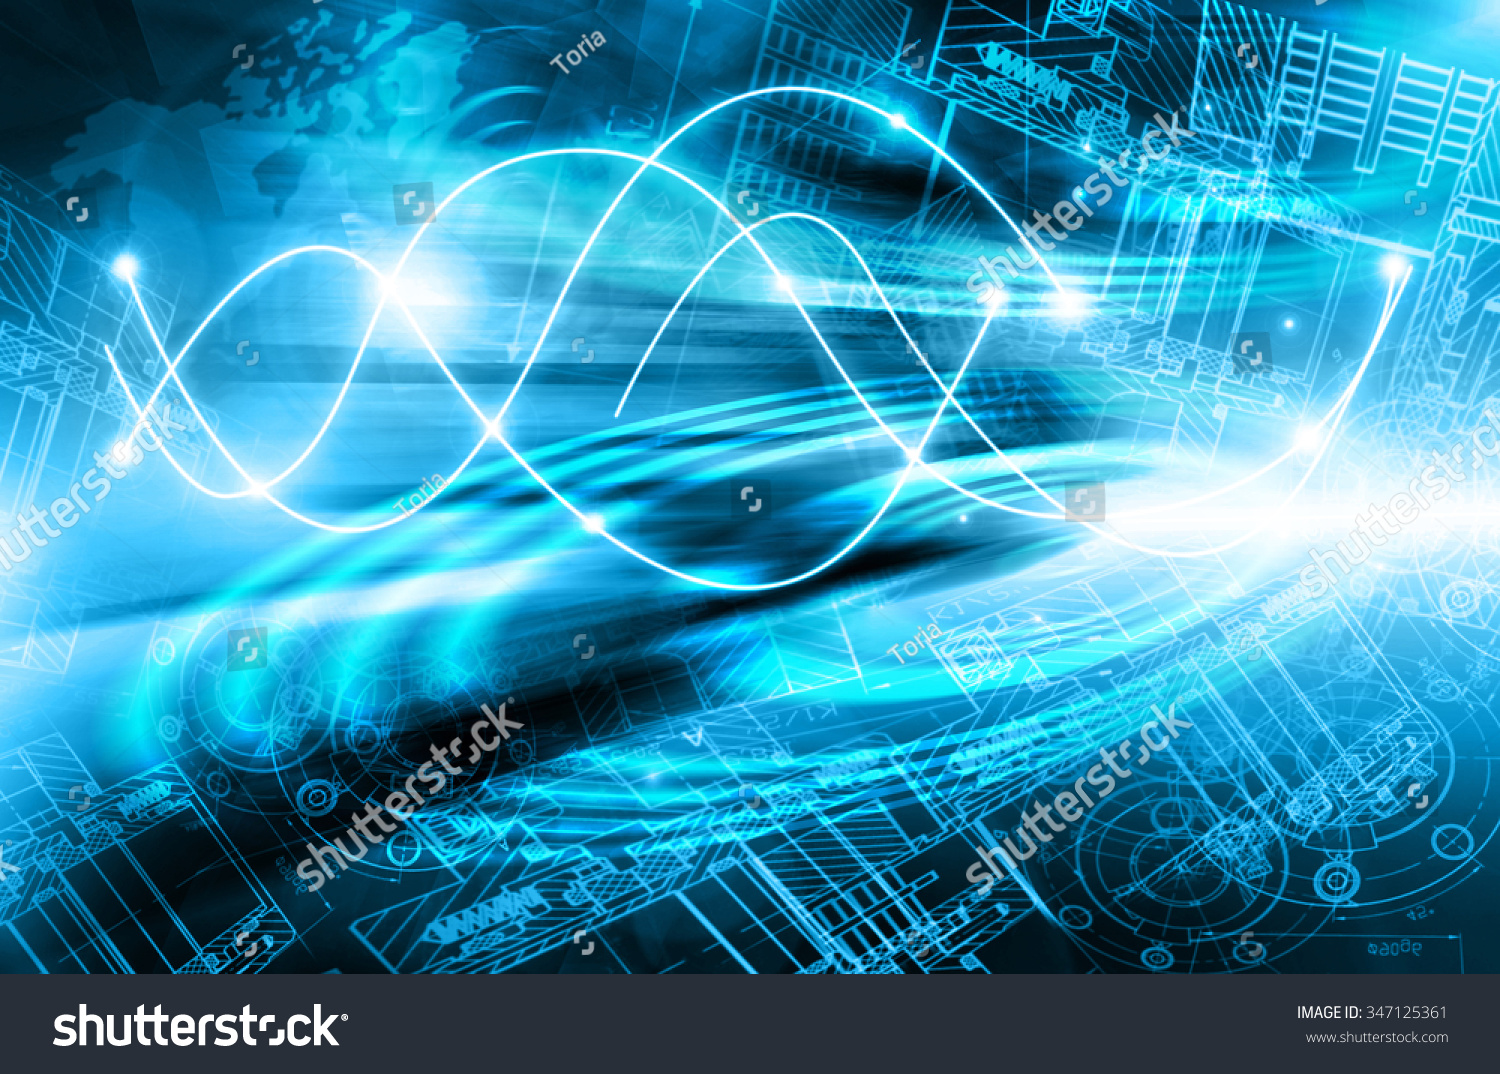 Abstract Blue Background Technology Background Series Stock Illustration